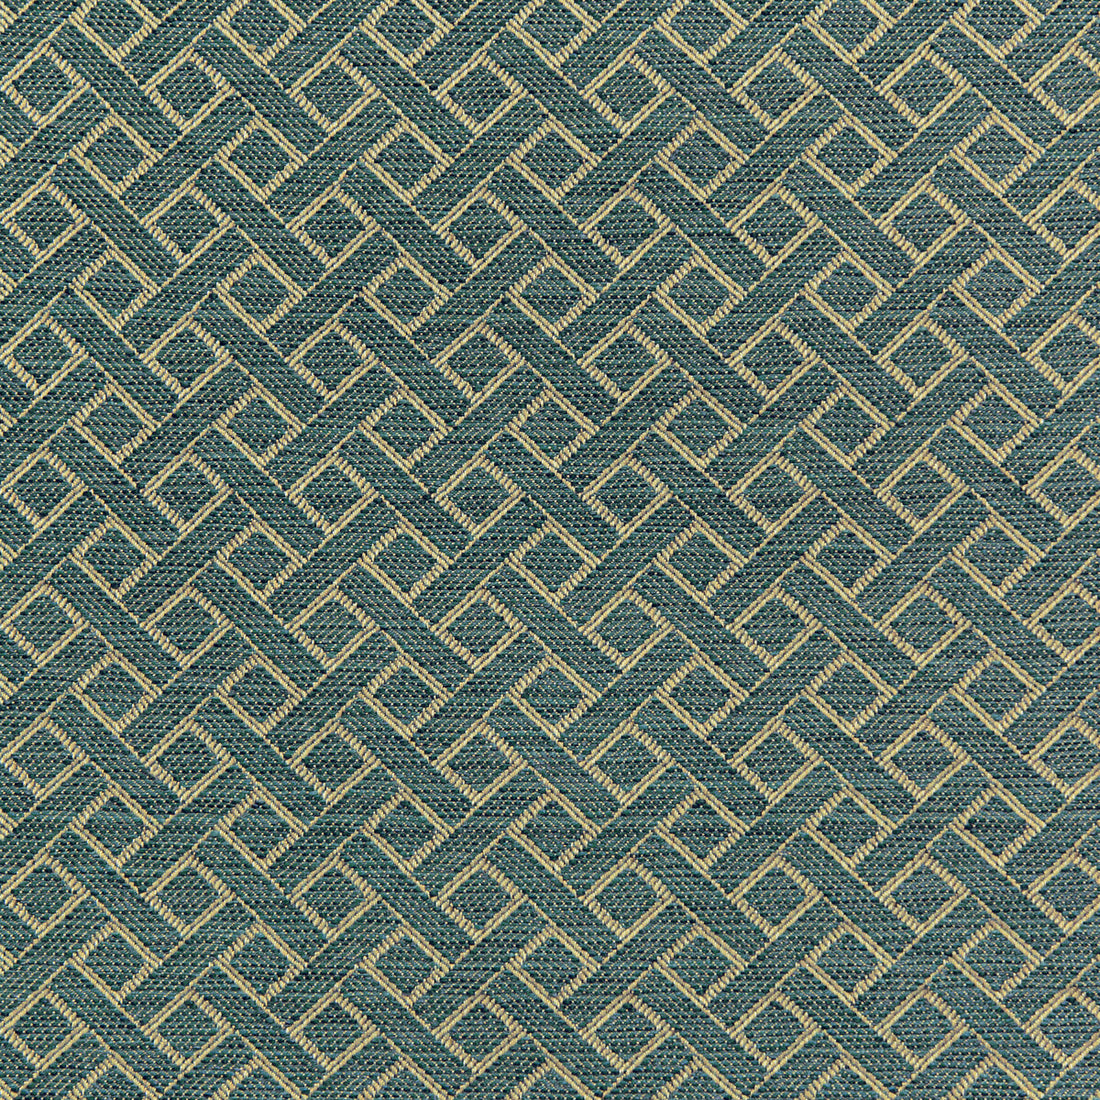 Maldon Weave fabric in marine color - pattern 2020102.505.0 - by Lee Jofa in the Linford Weaves collection